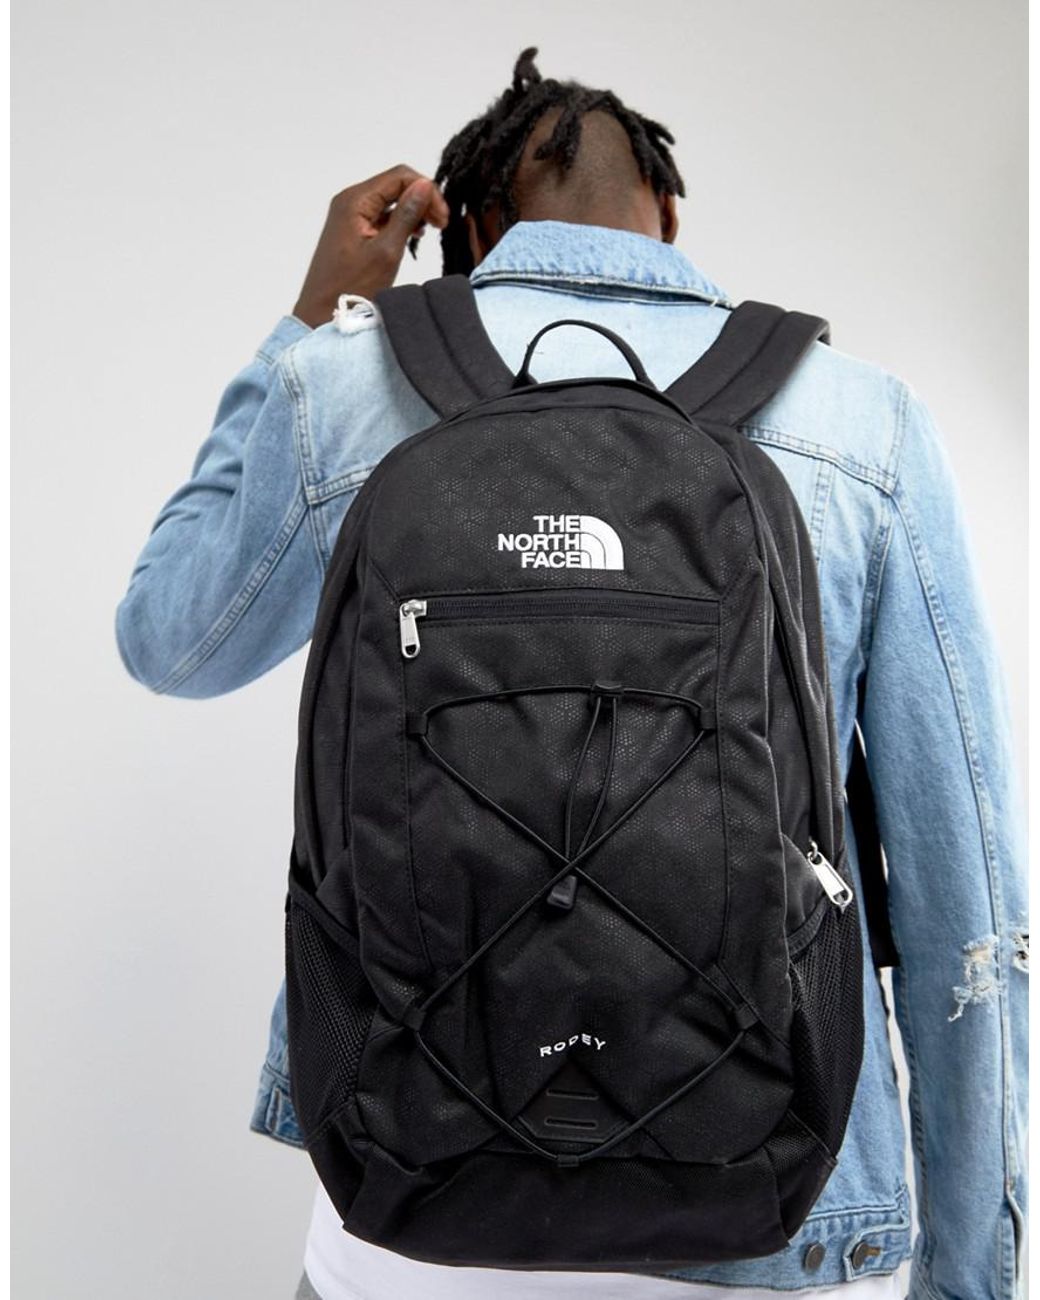 The North Face Rodey Backpack 27 Litres In Black for Men | Lyst